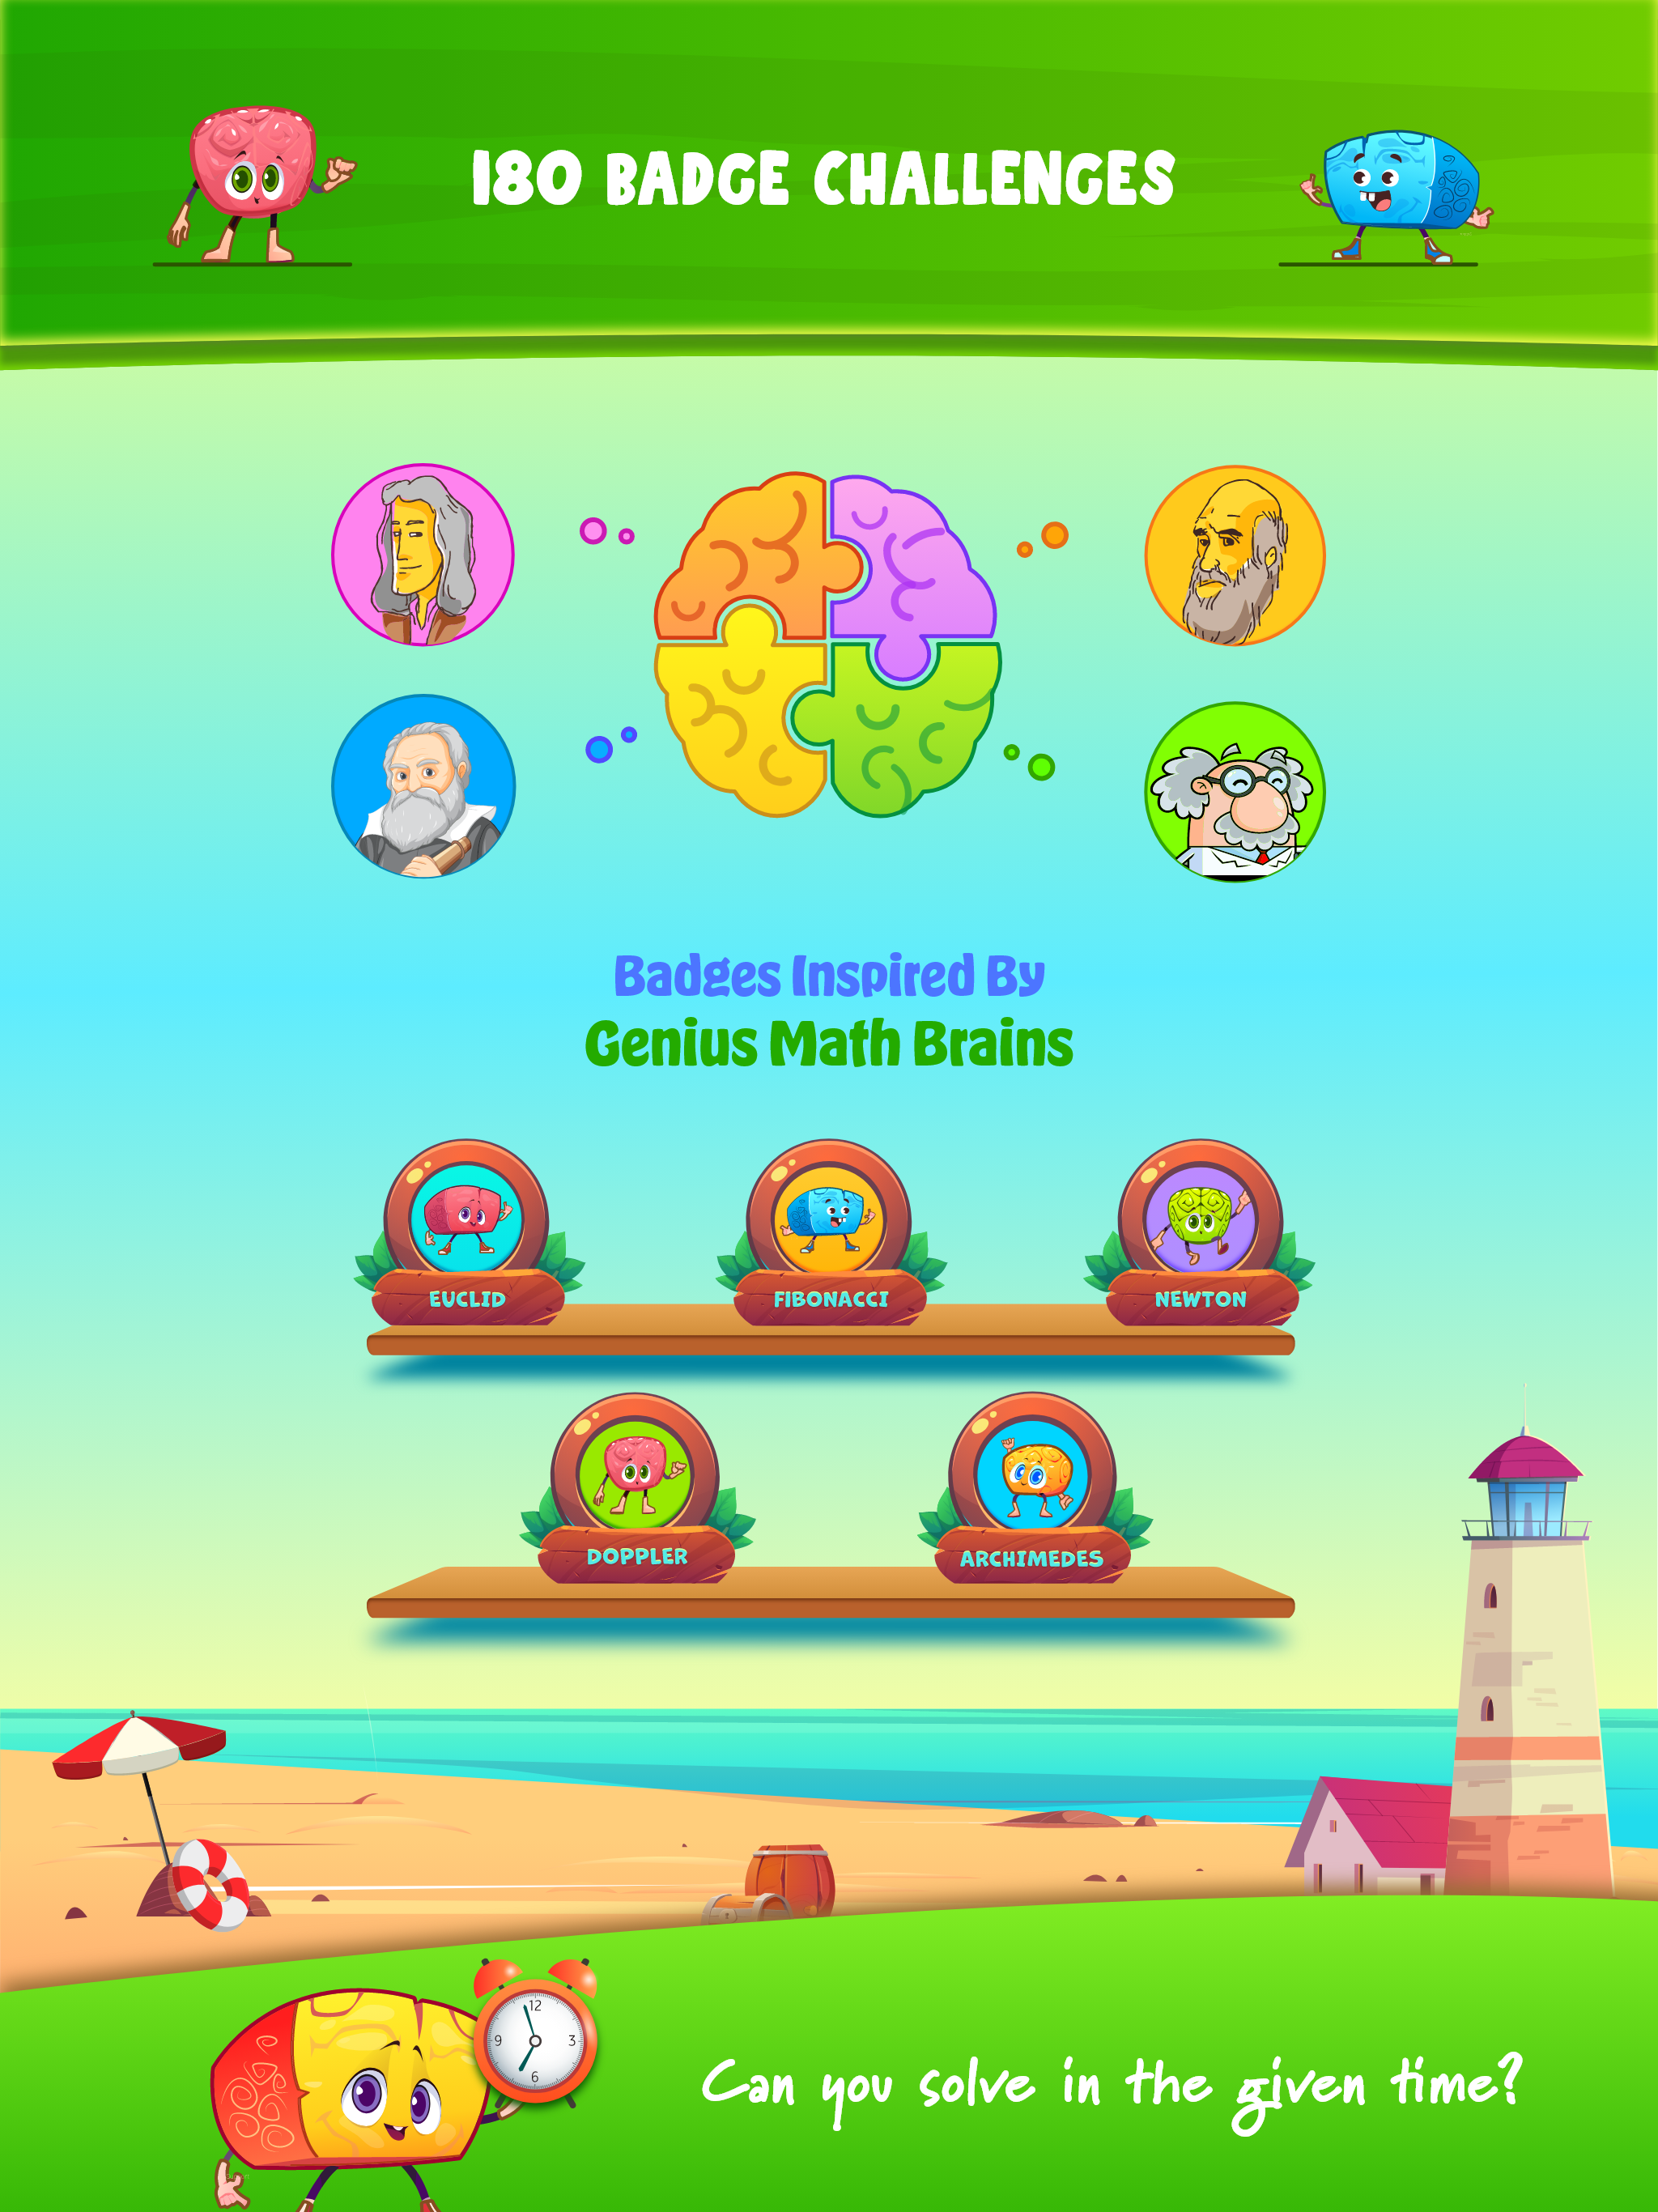 Jelly Cove Math Puzzles